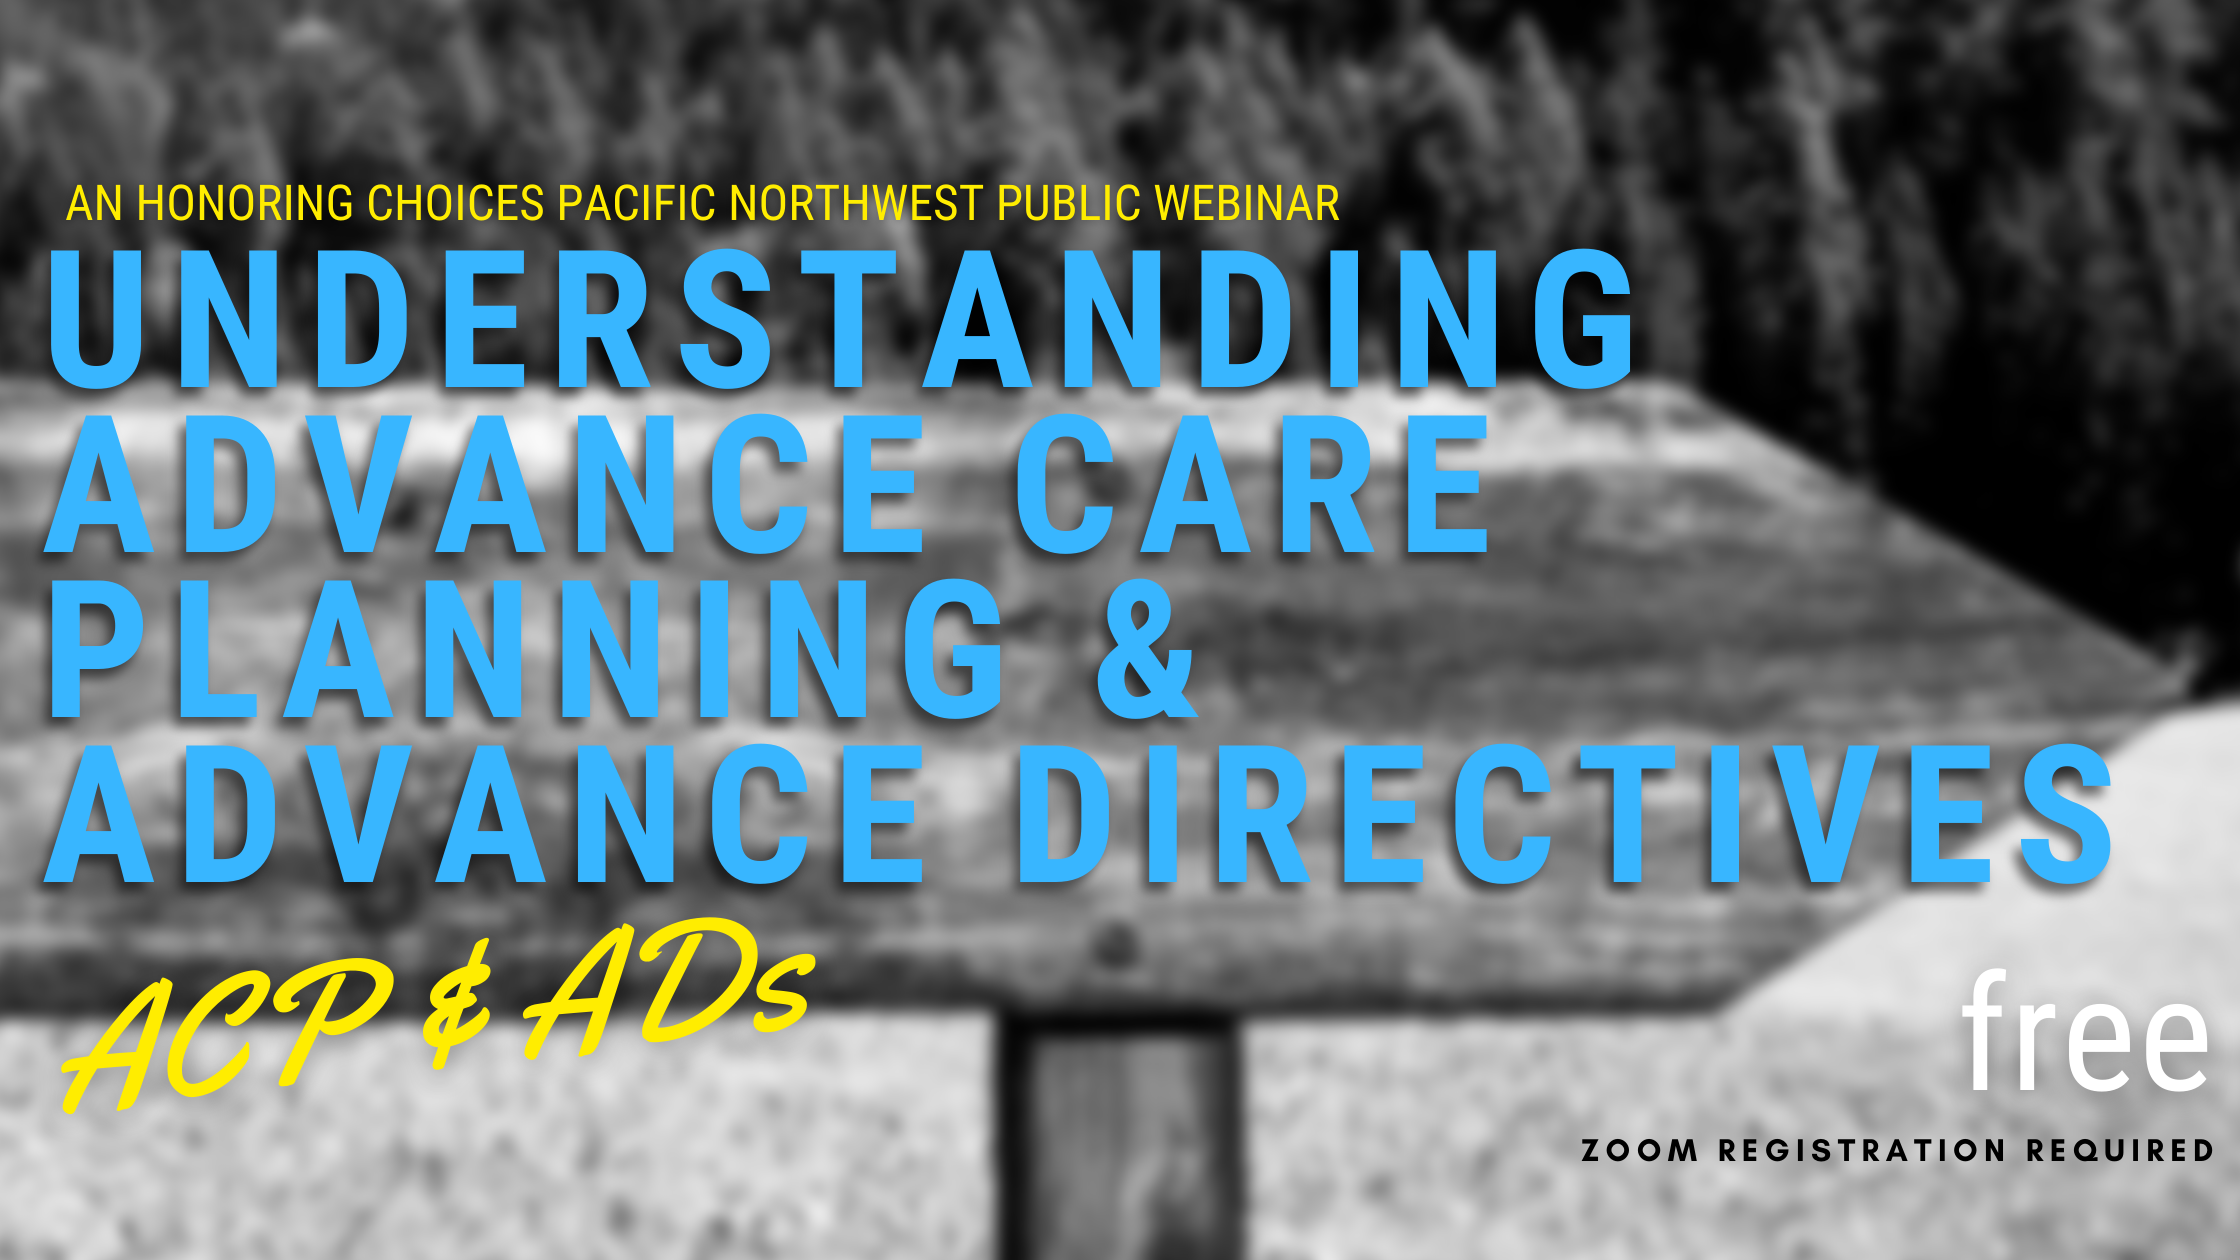 Graphic of arrow sign with text "An Honoring Choices Public Webinar. Understanding Advance Care Planning & Advance Directives. Free. Registration Required"